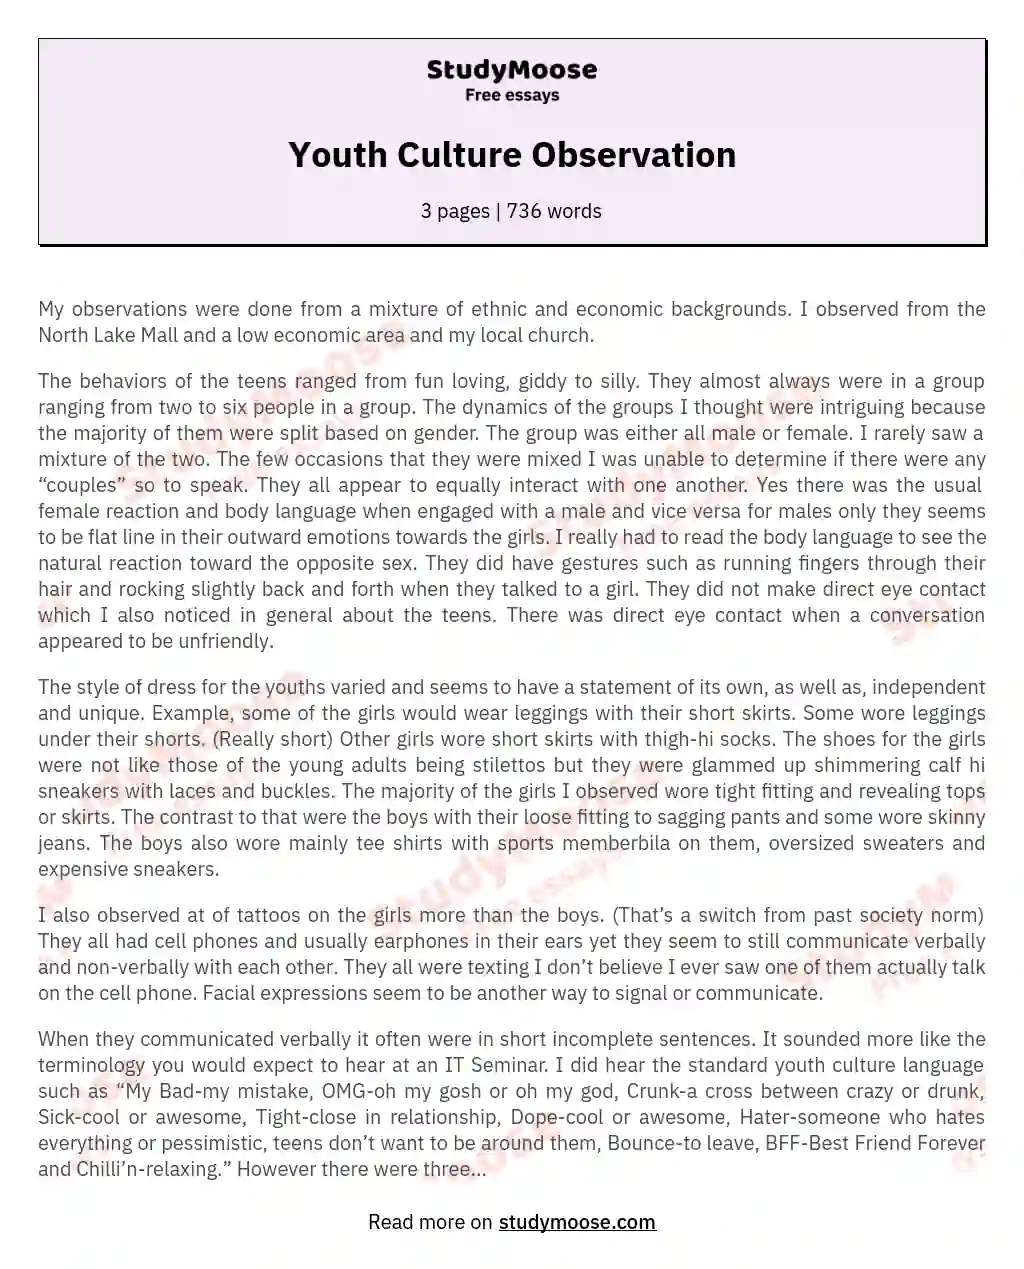 essay on youth culture